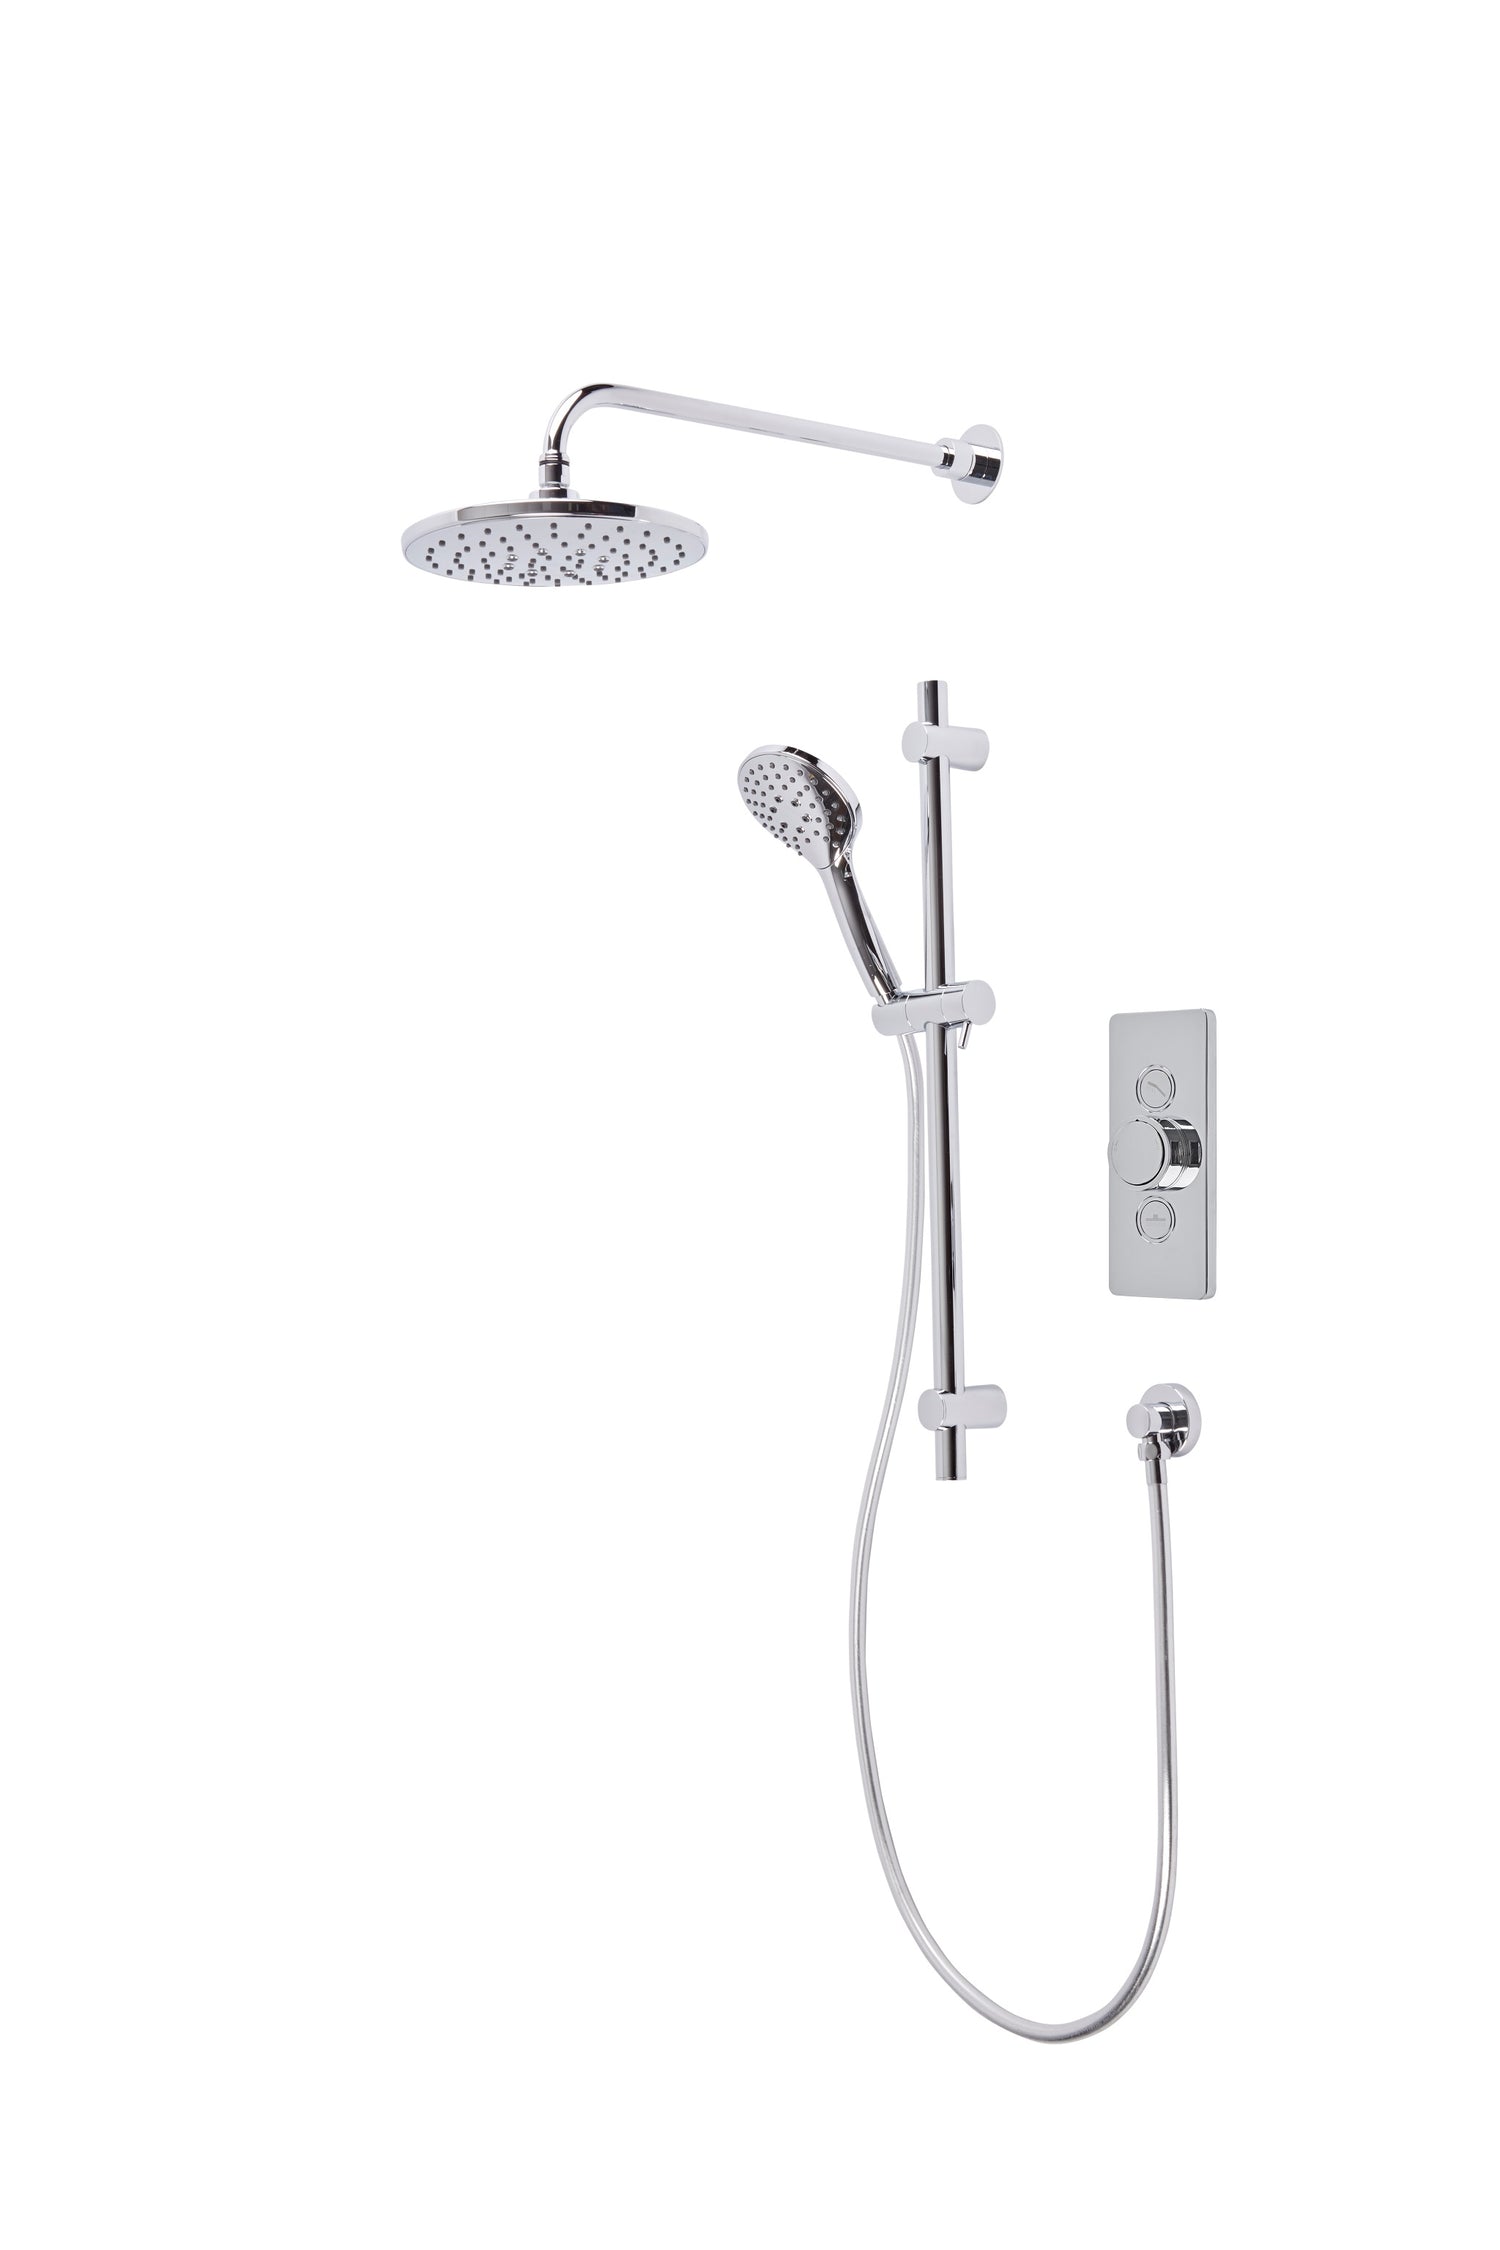 Tavistock Axiom Dual Function Push Button Shower System With Head And Riser Kit